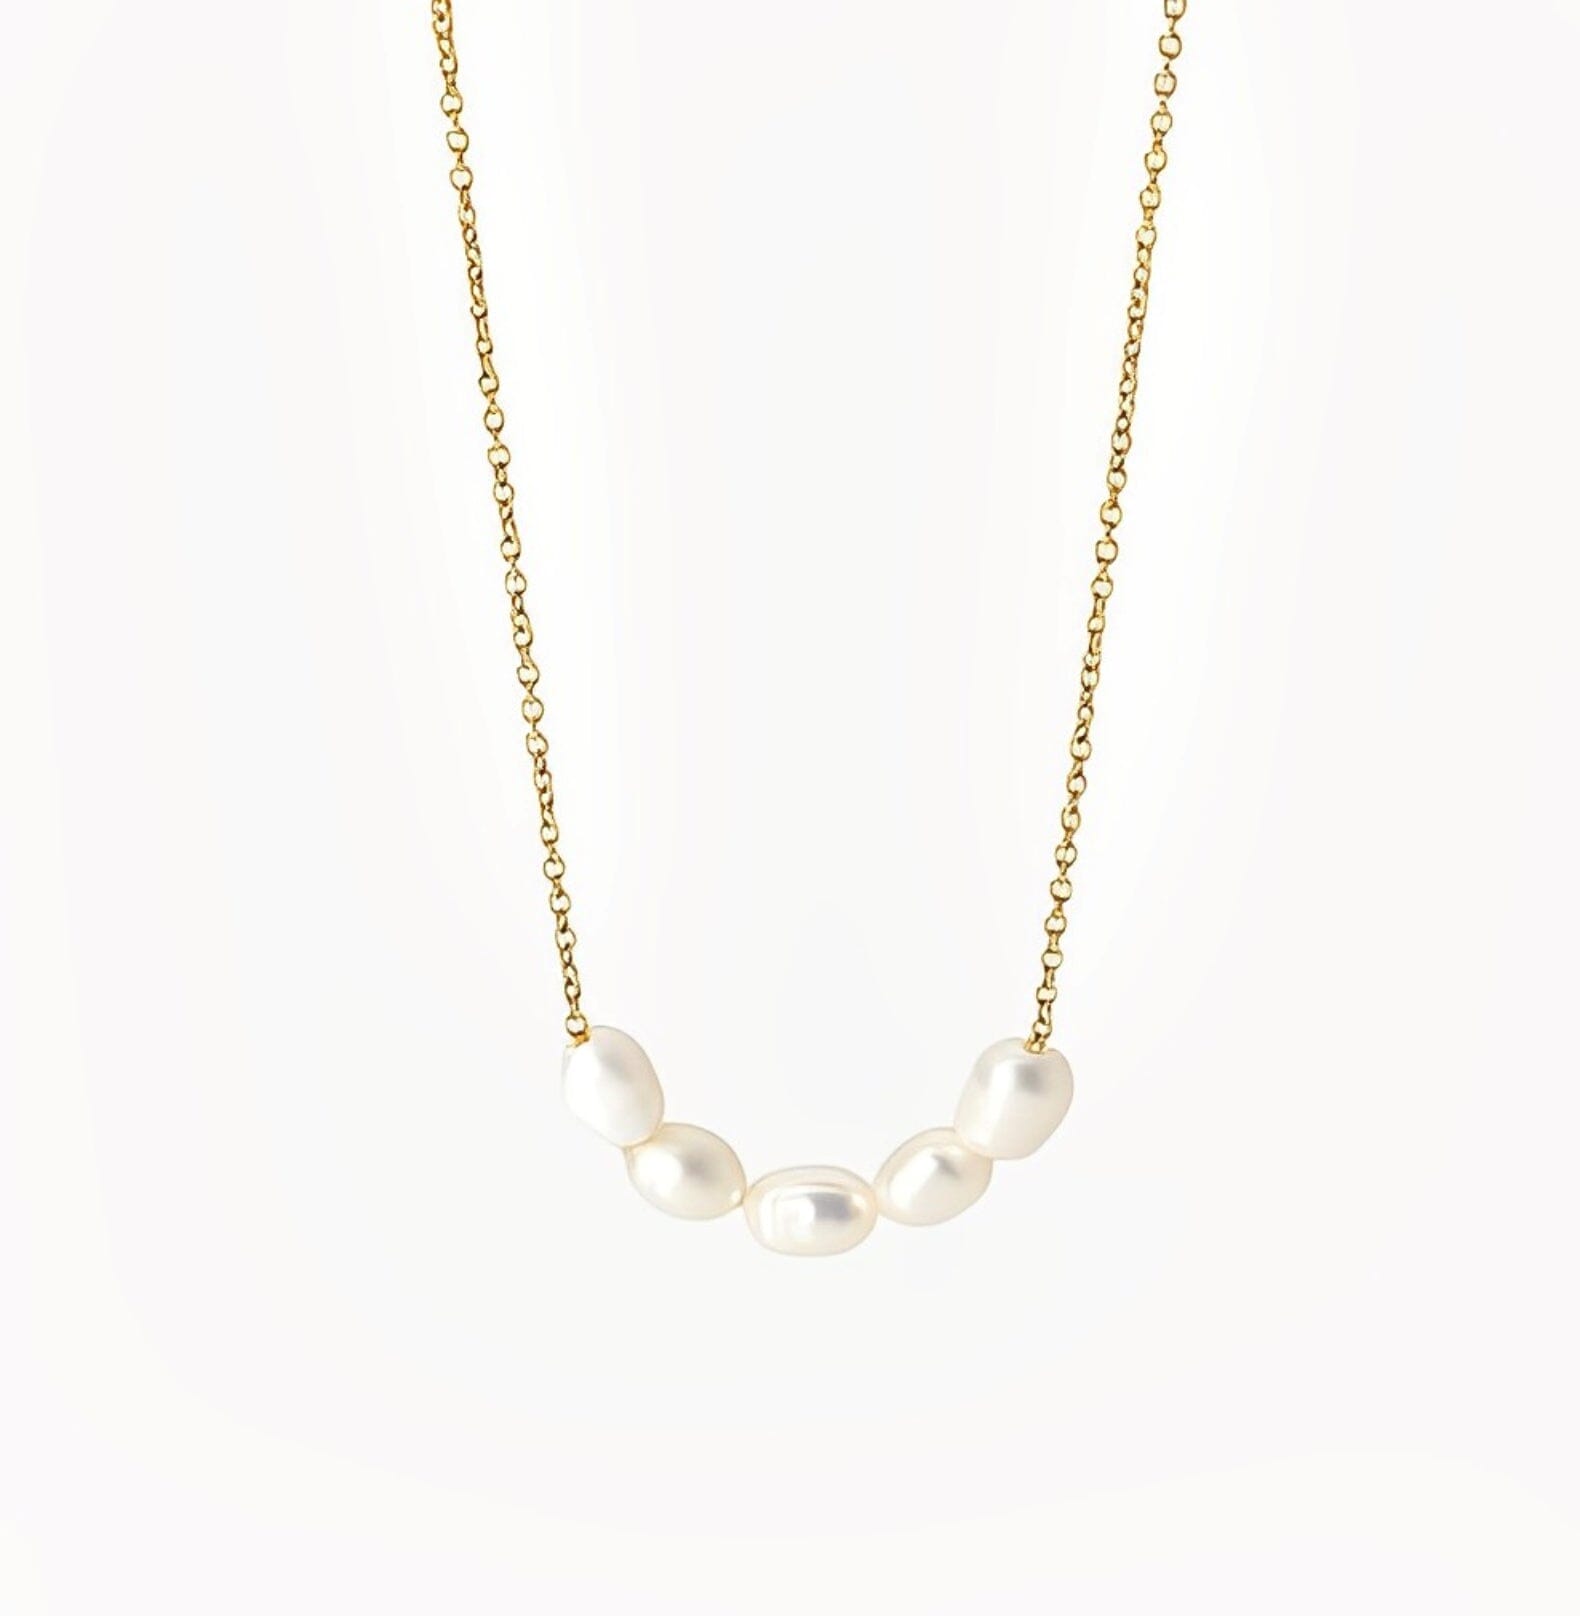 1 PEARL POWER NECKLACE neck Yubama Jewelry Online Store - The Elegant Designs of Gold and Silver ! 